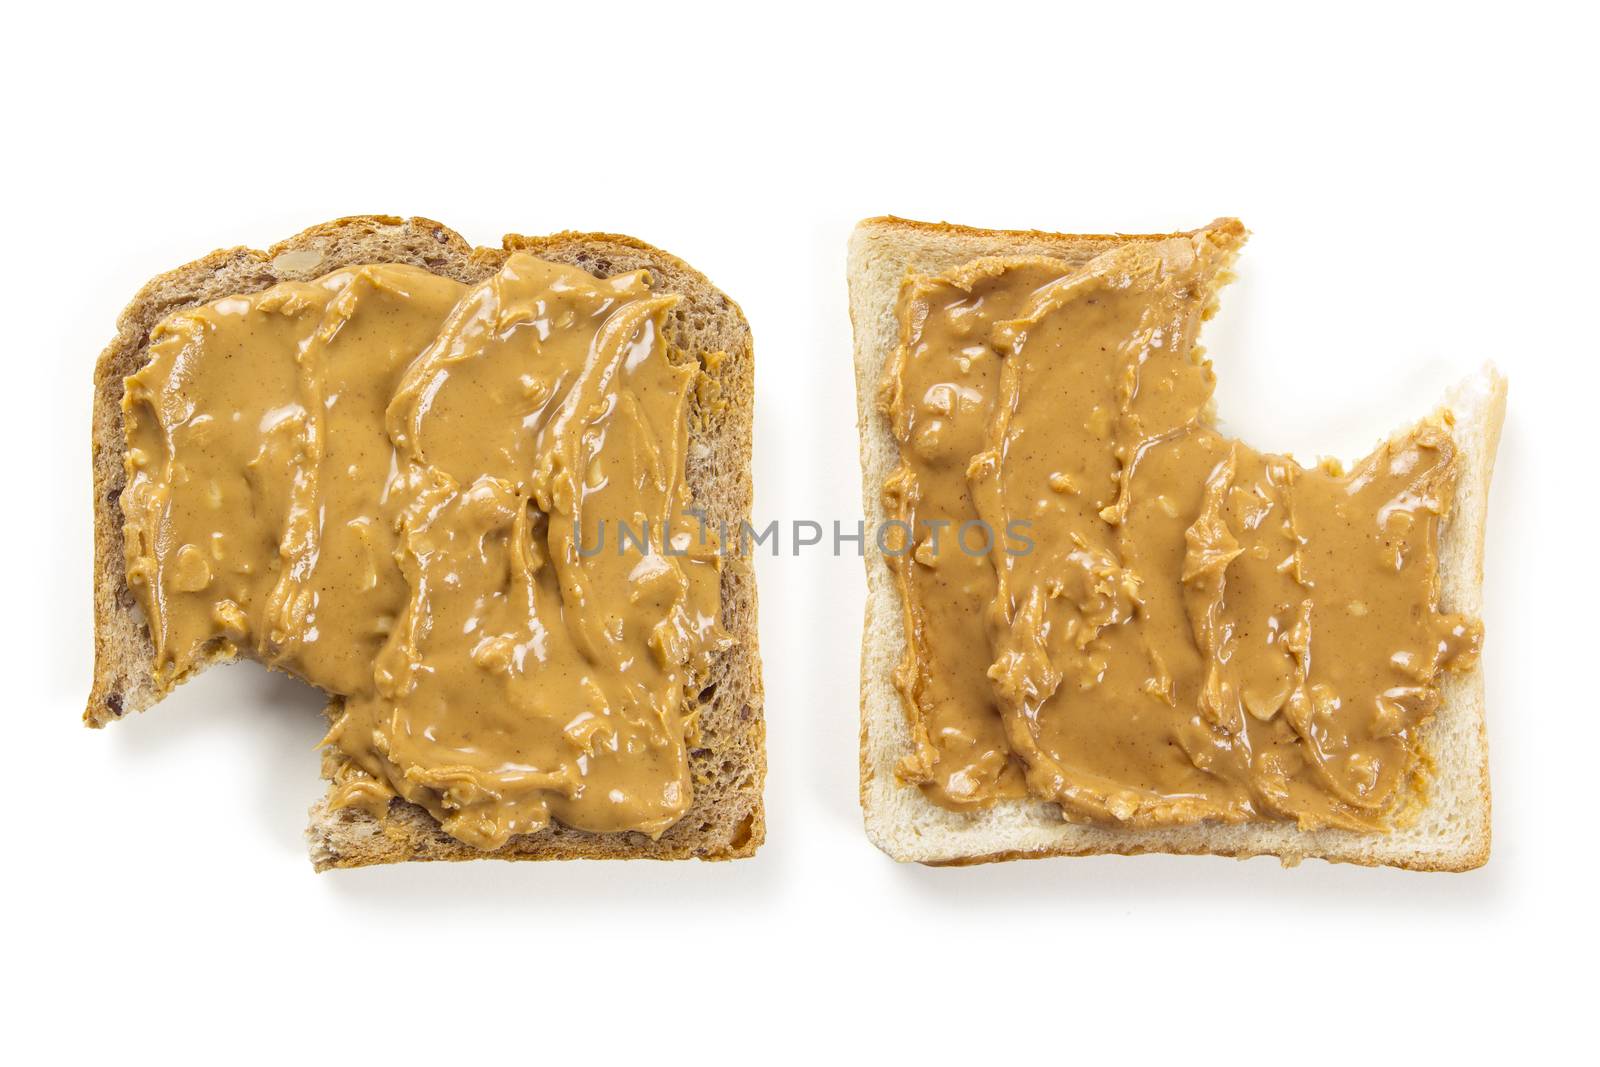 Peanut butter bread with bites by sumners